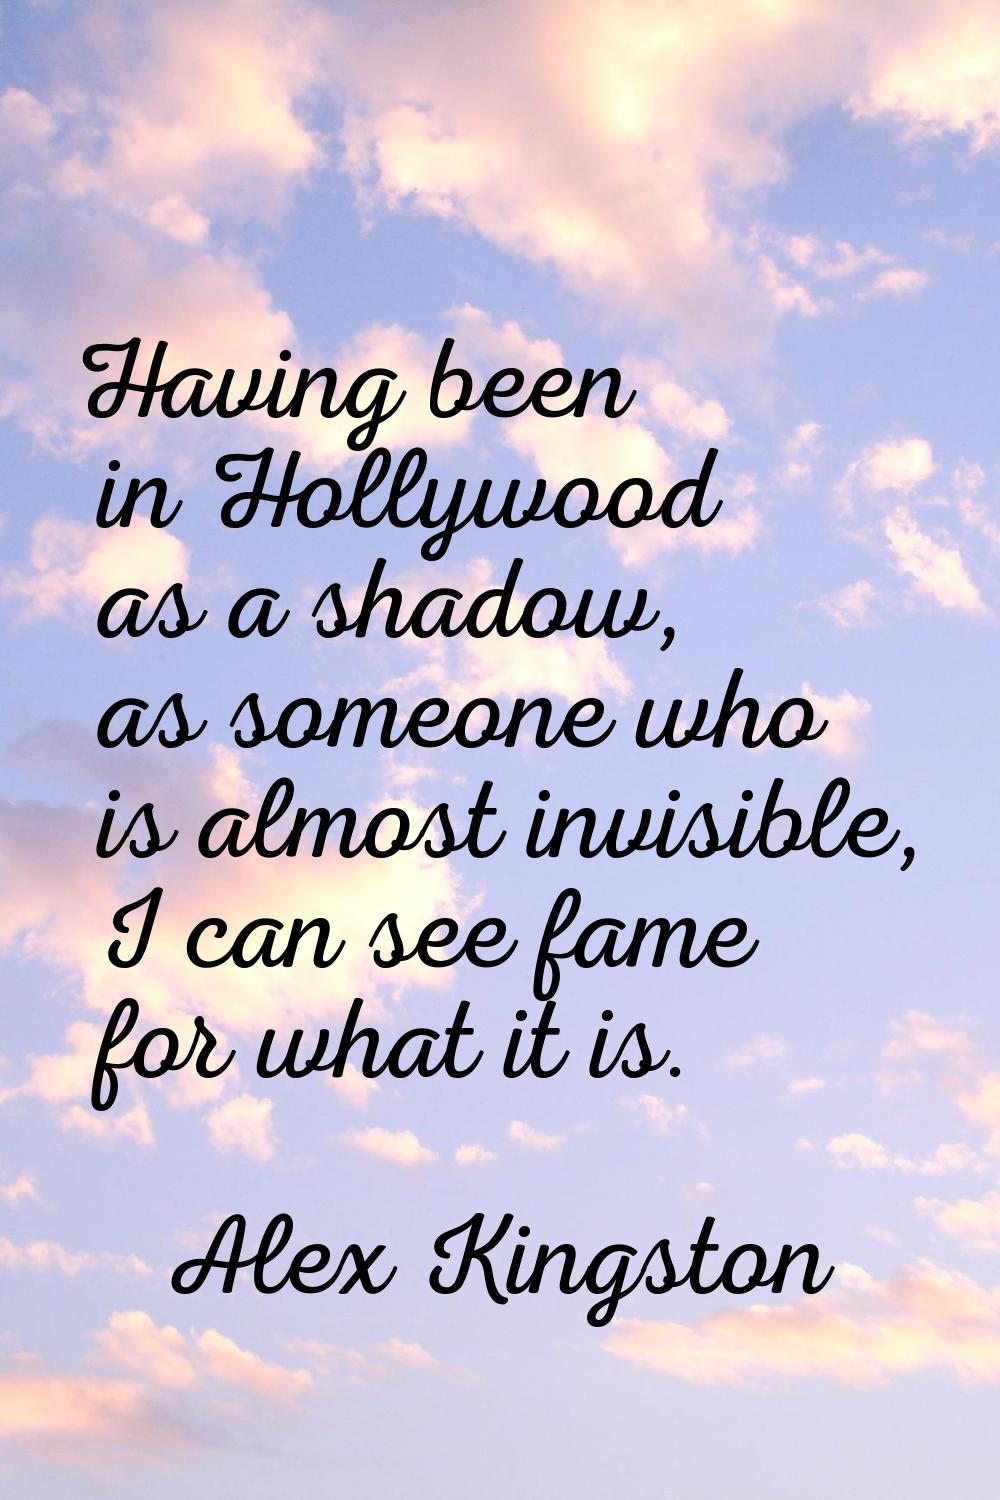 Having been in Hollywood as a shadow, as someone who is almost invisible, I can see fame for what i